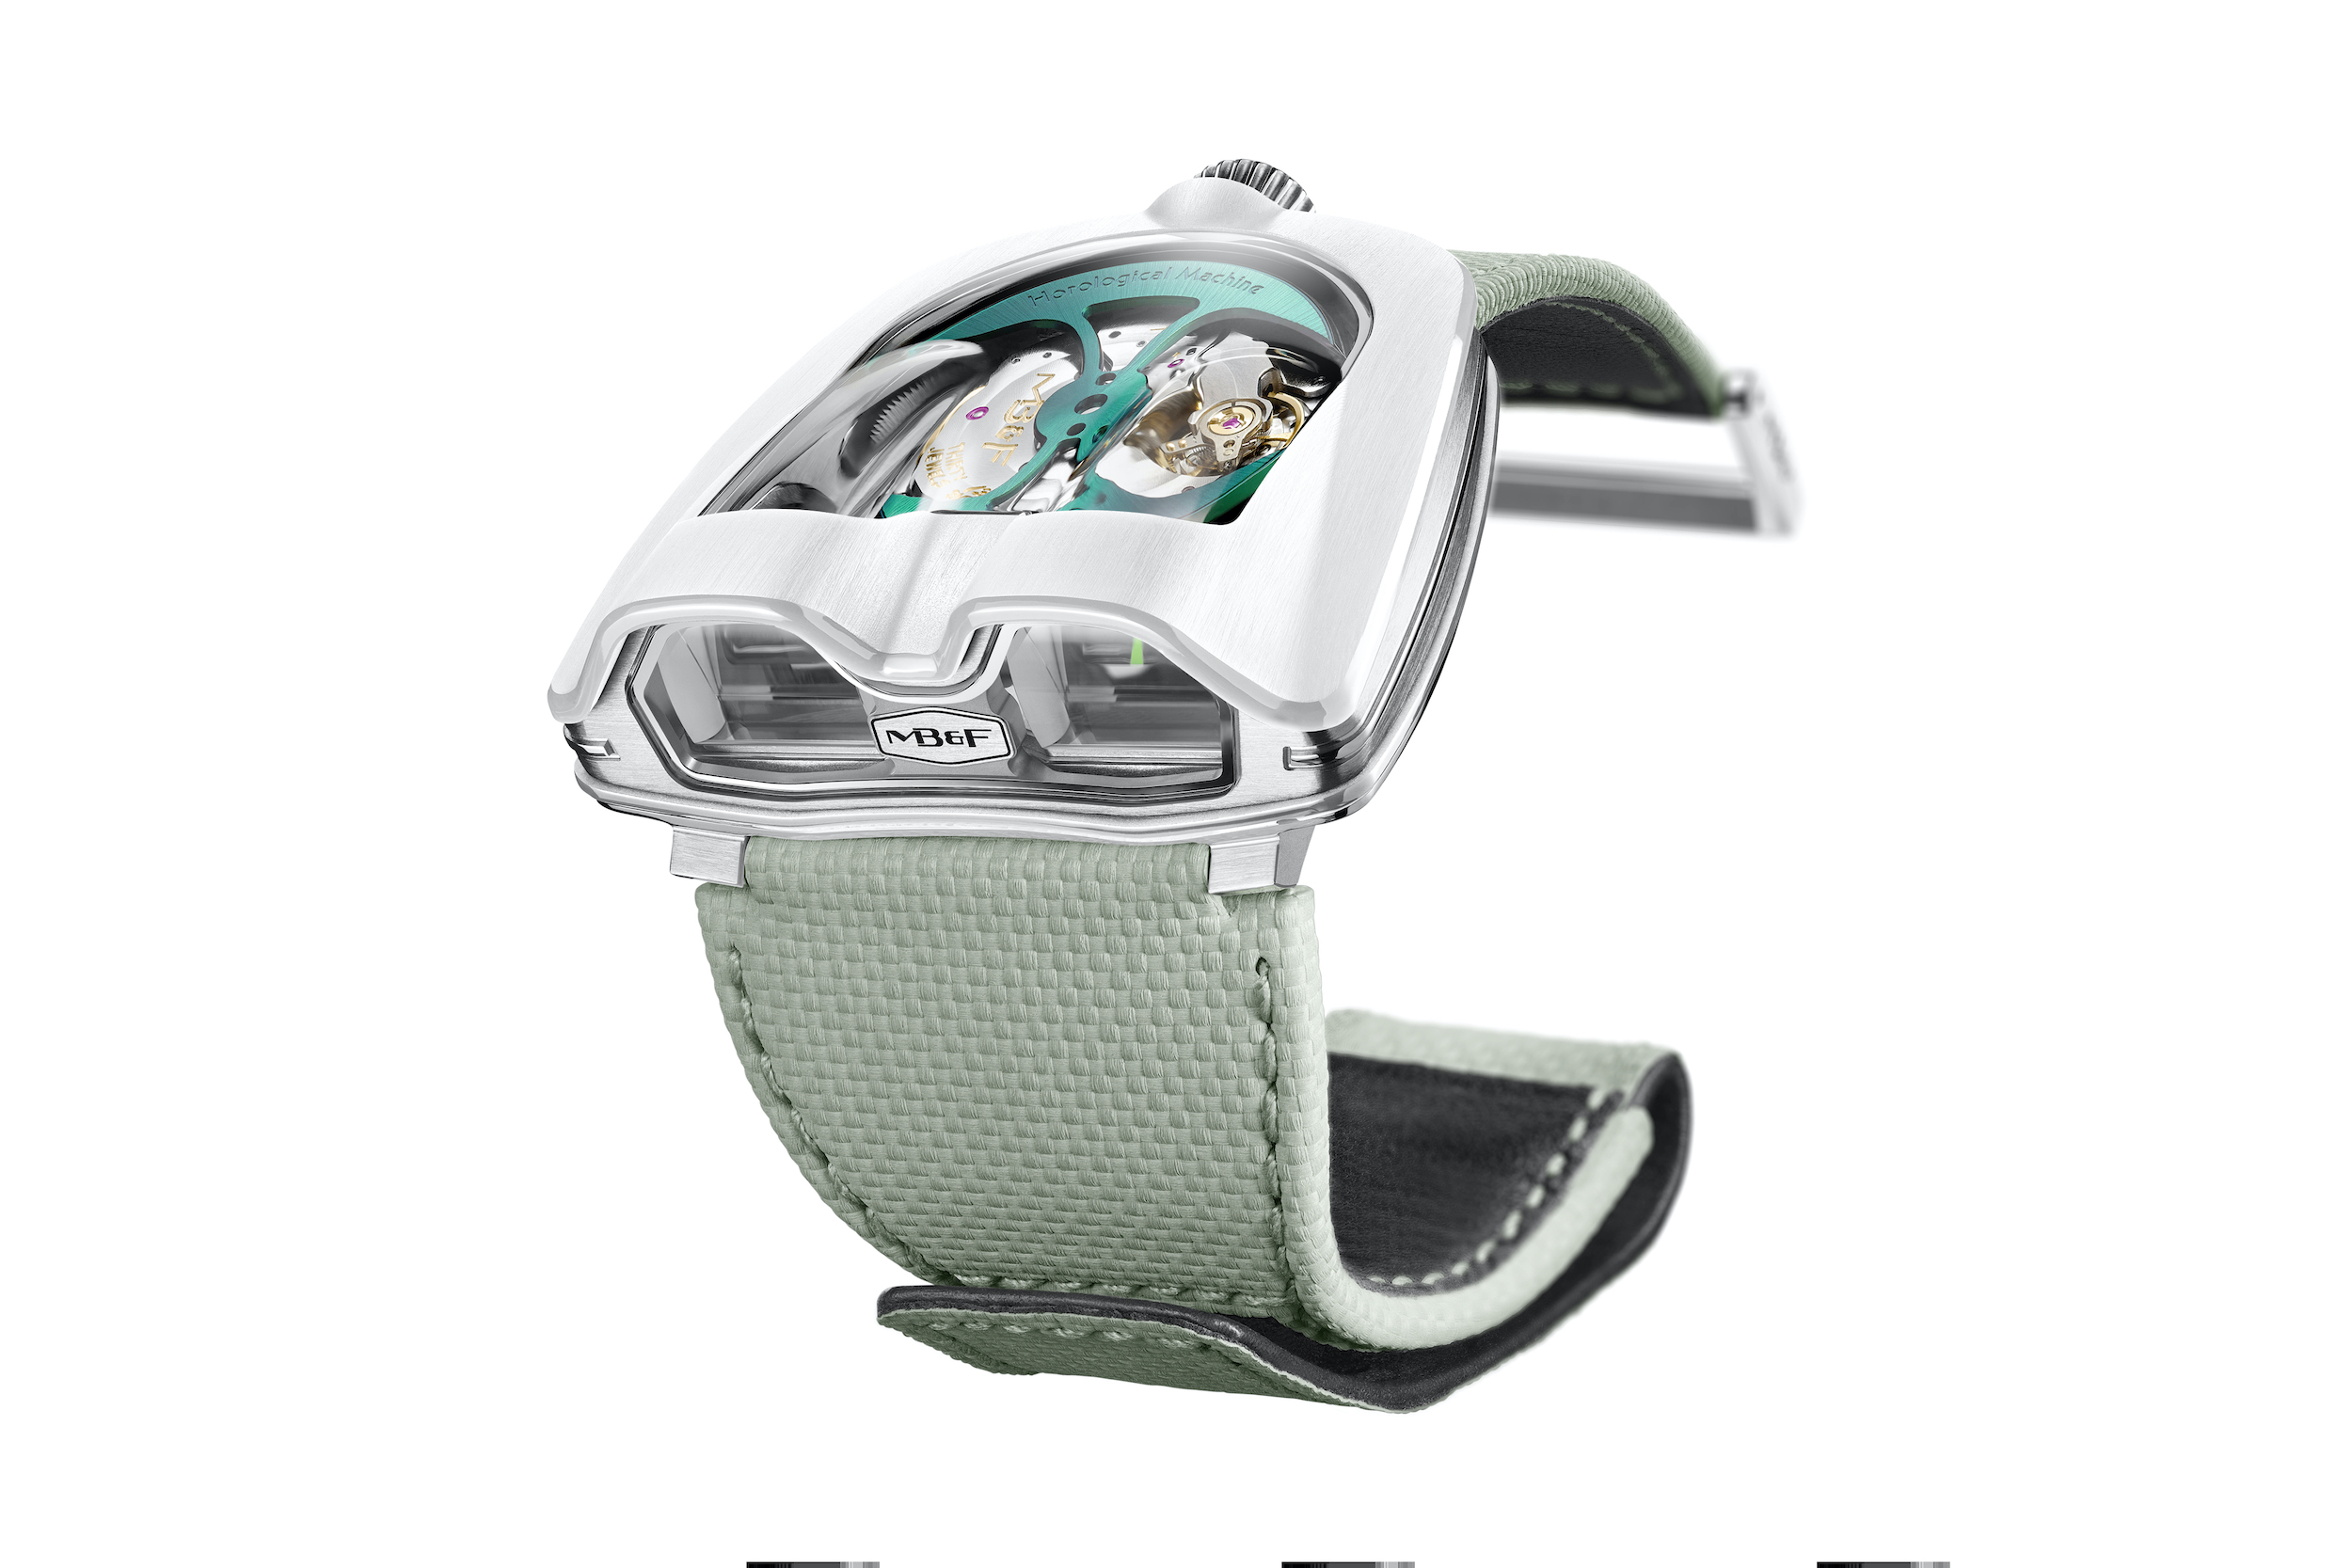 mb&f watches hm8 mark 2 models trends watches luxury swiss made carbon-fibre men titanium